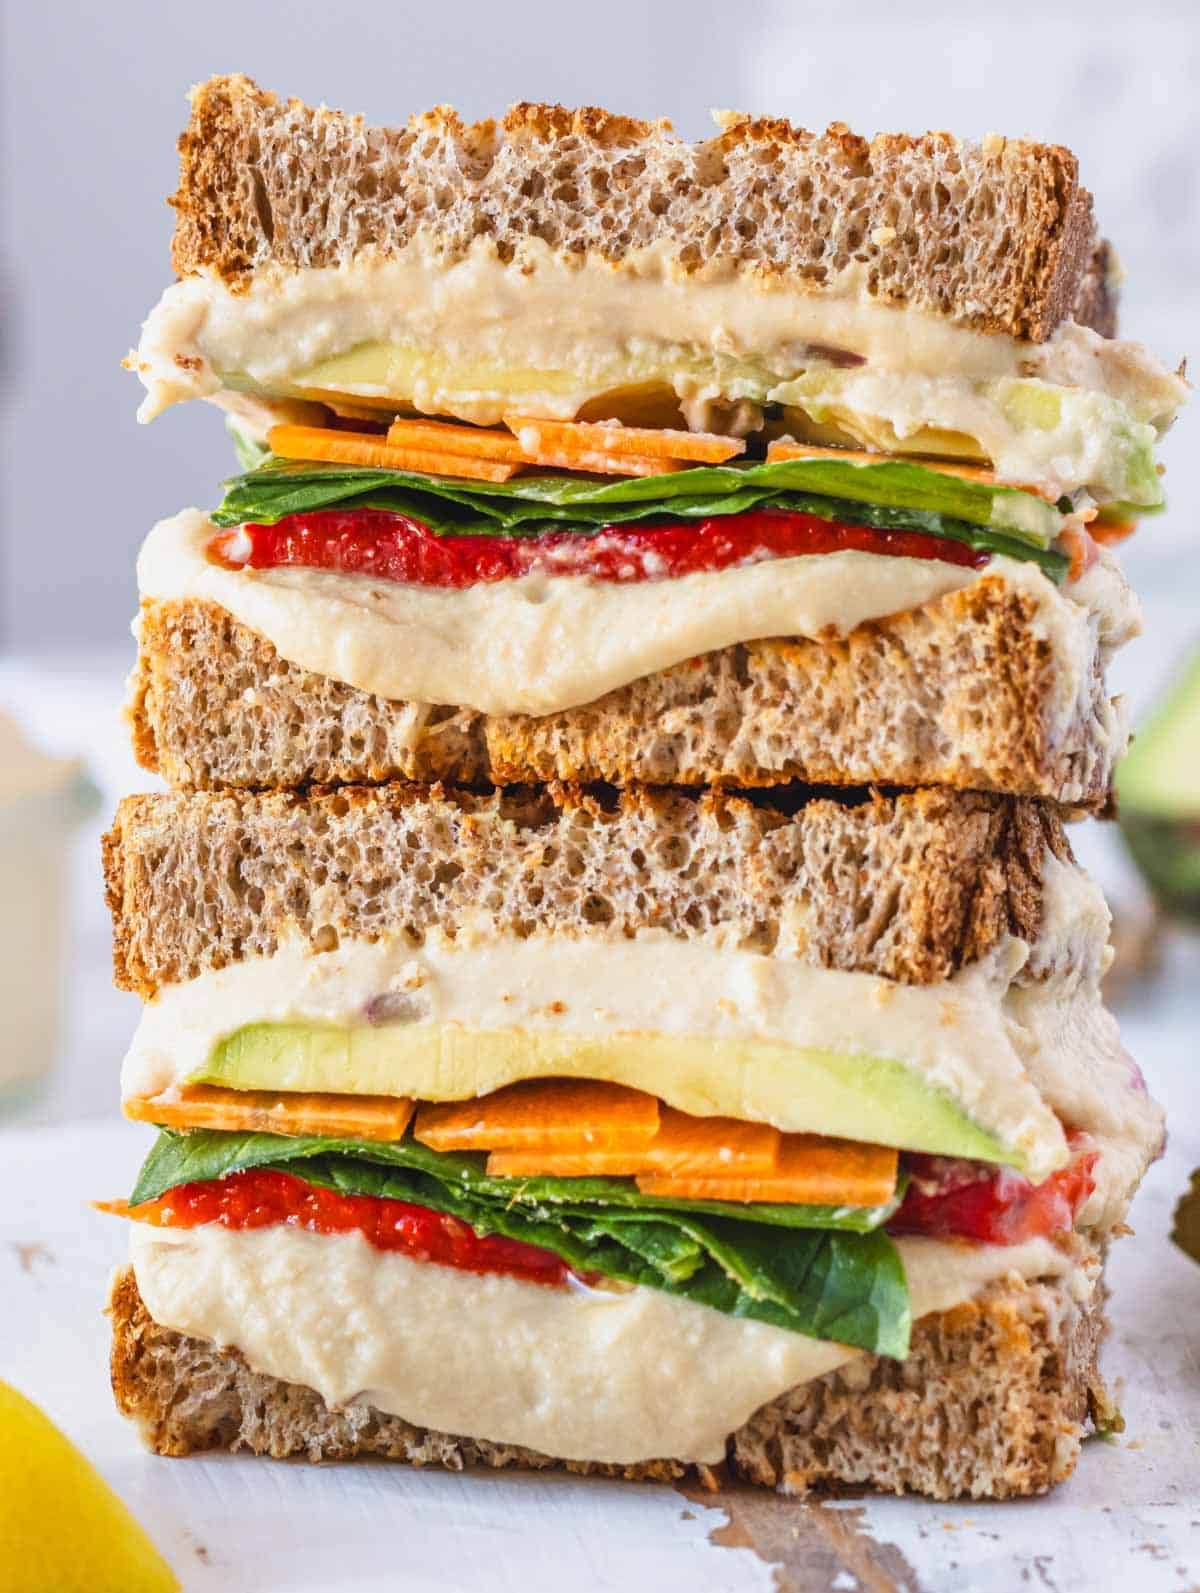 Hummus sandwich with spinach and carrot